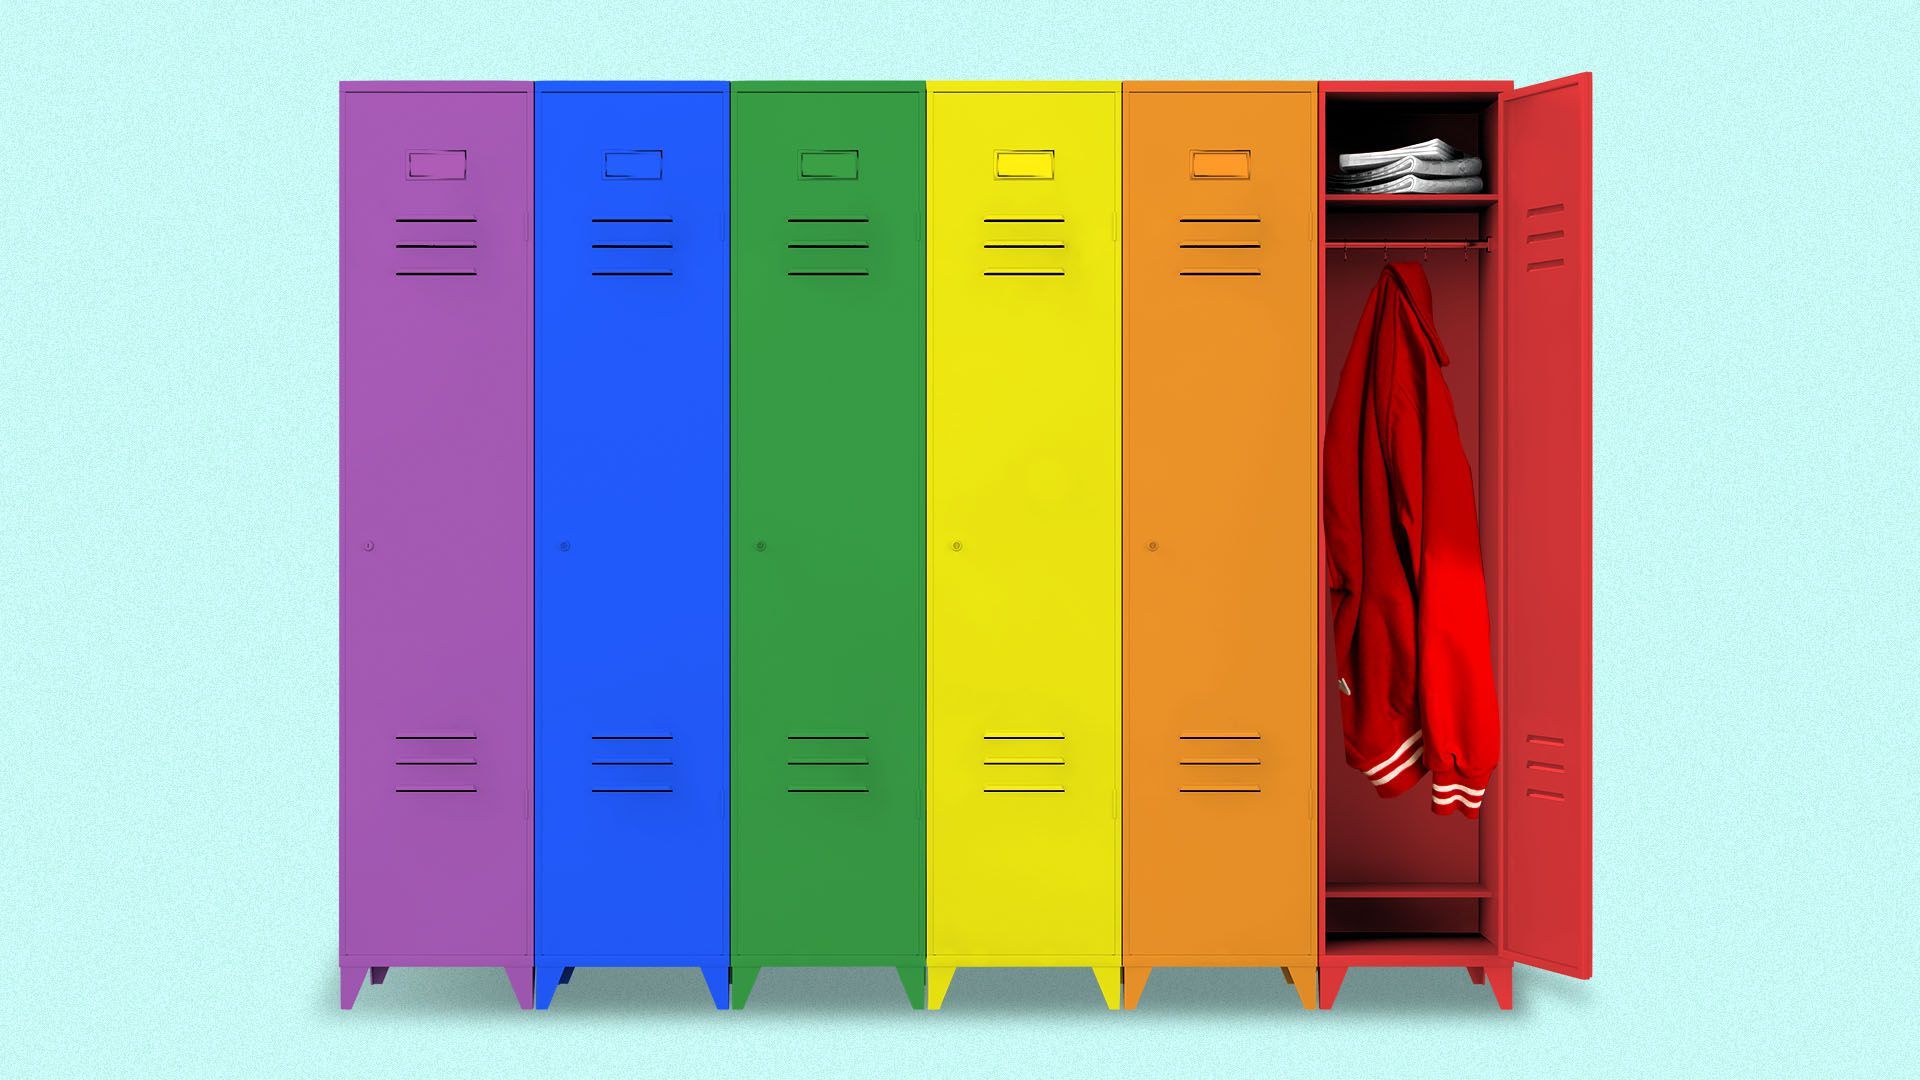 Illustration of a set of lockers with the colors of the rainbow flag